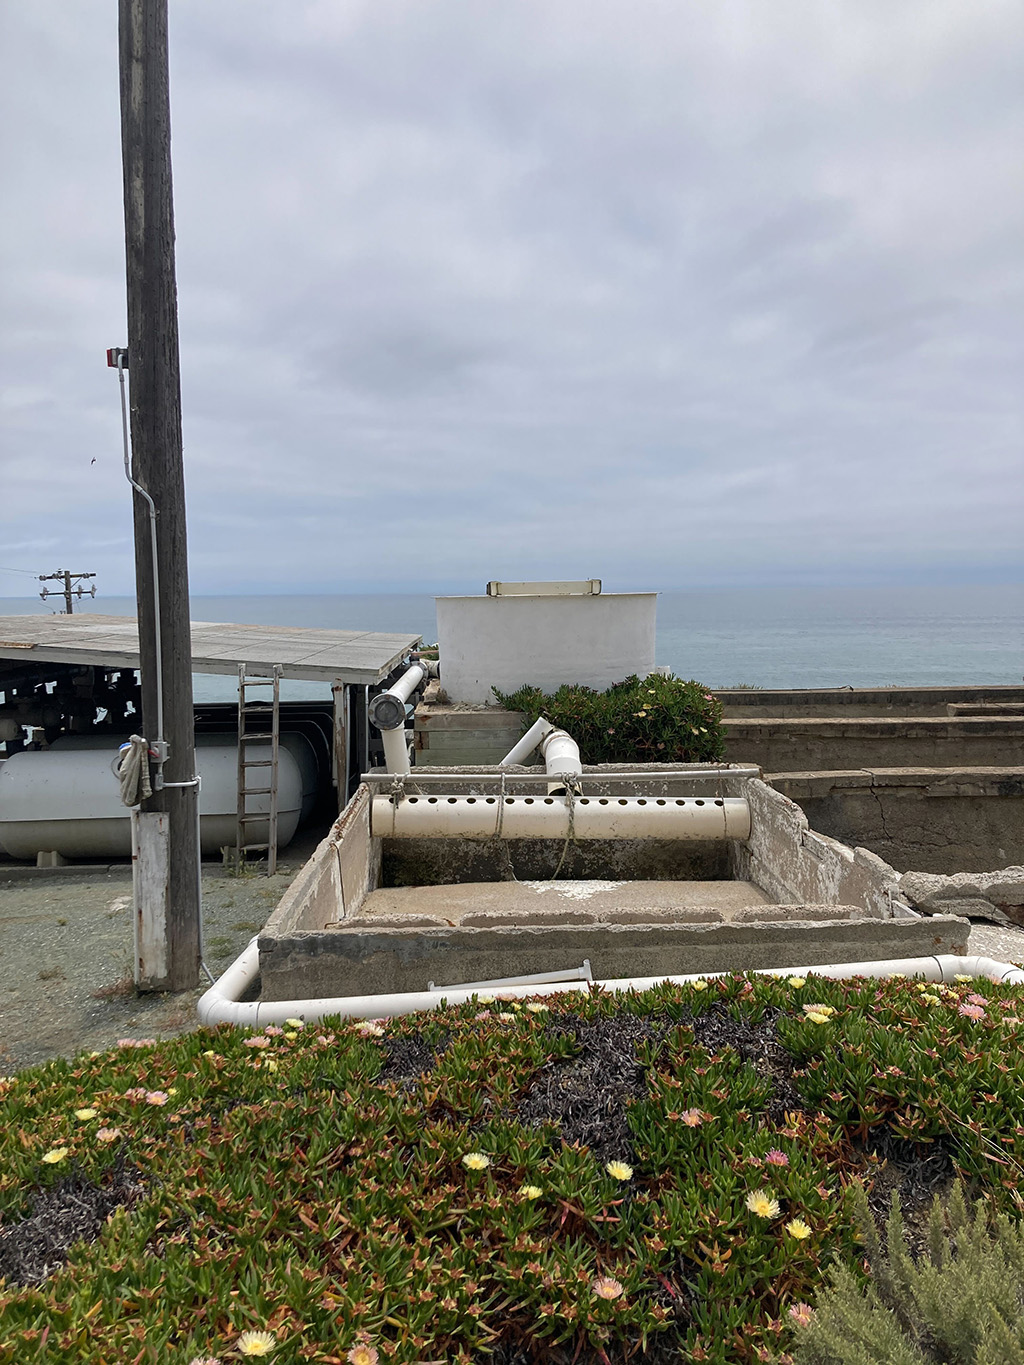 A tall pole stands next to a large concrete tank. Flowering ice plant is visible in the foreground, and the gray sky and ocean blend together in the background.